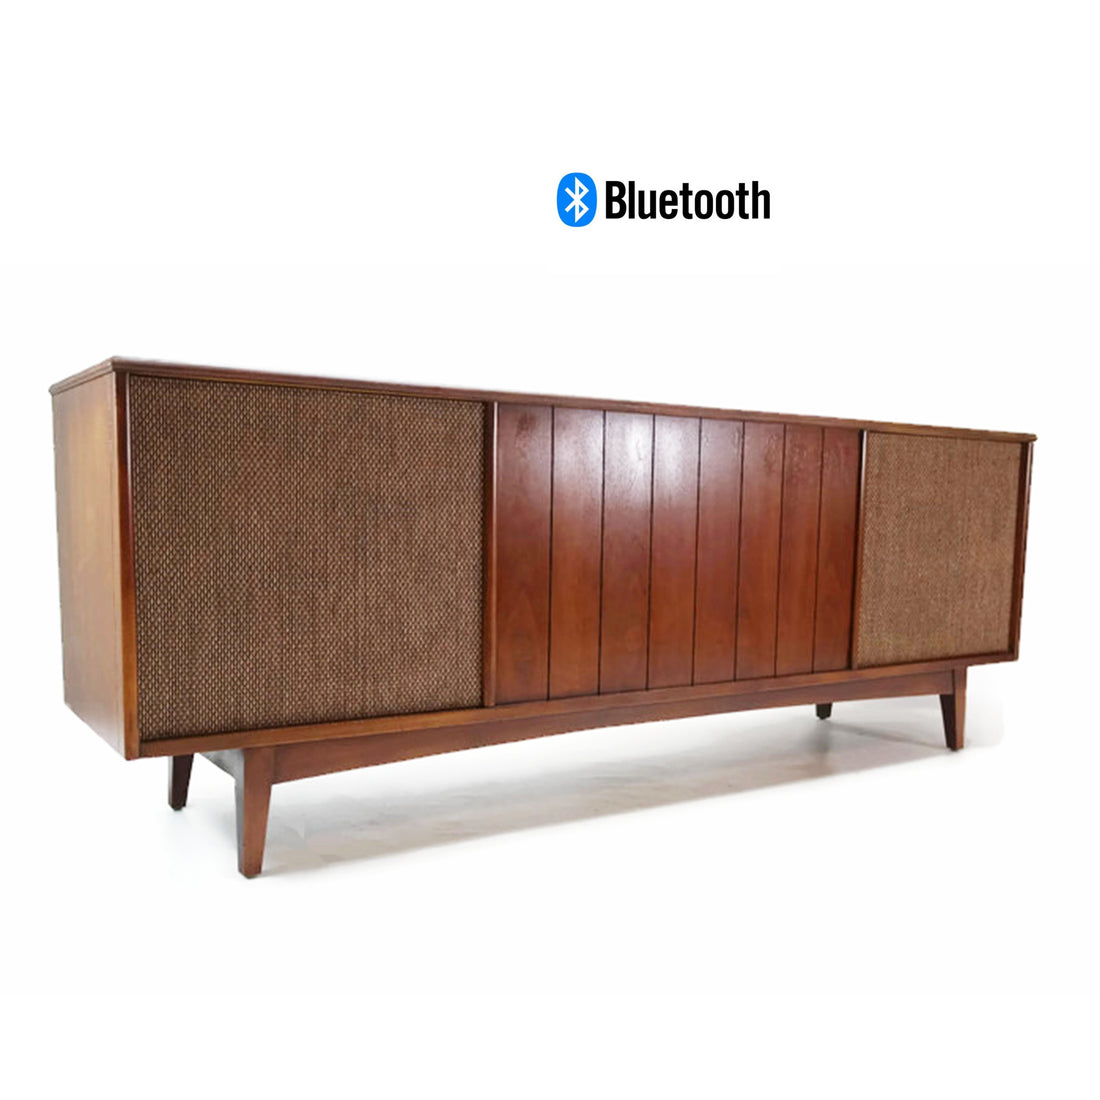 The Vintedge Co™ - ADMIRAL Long and Low Vintage Record Player Changer Stereo Console - Bluetooth